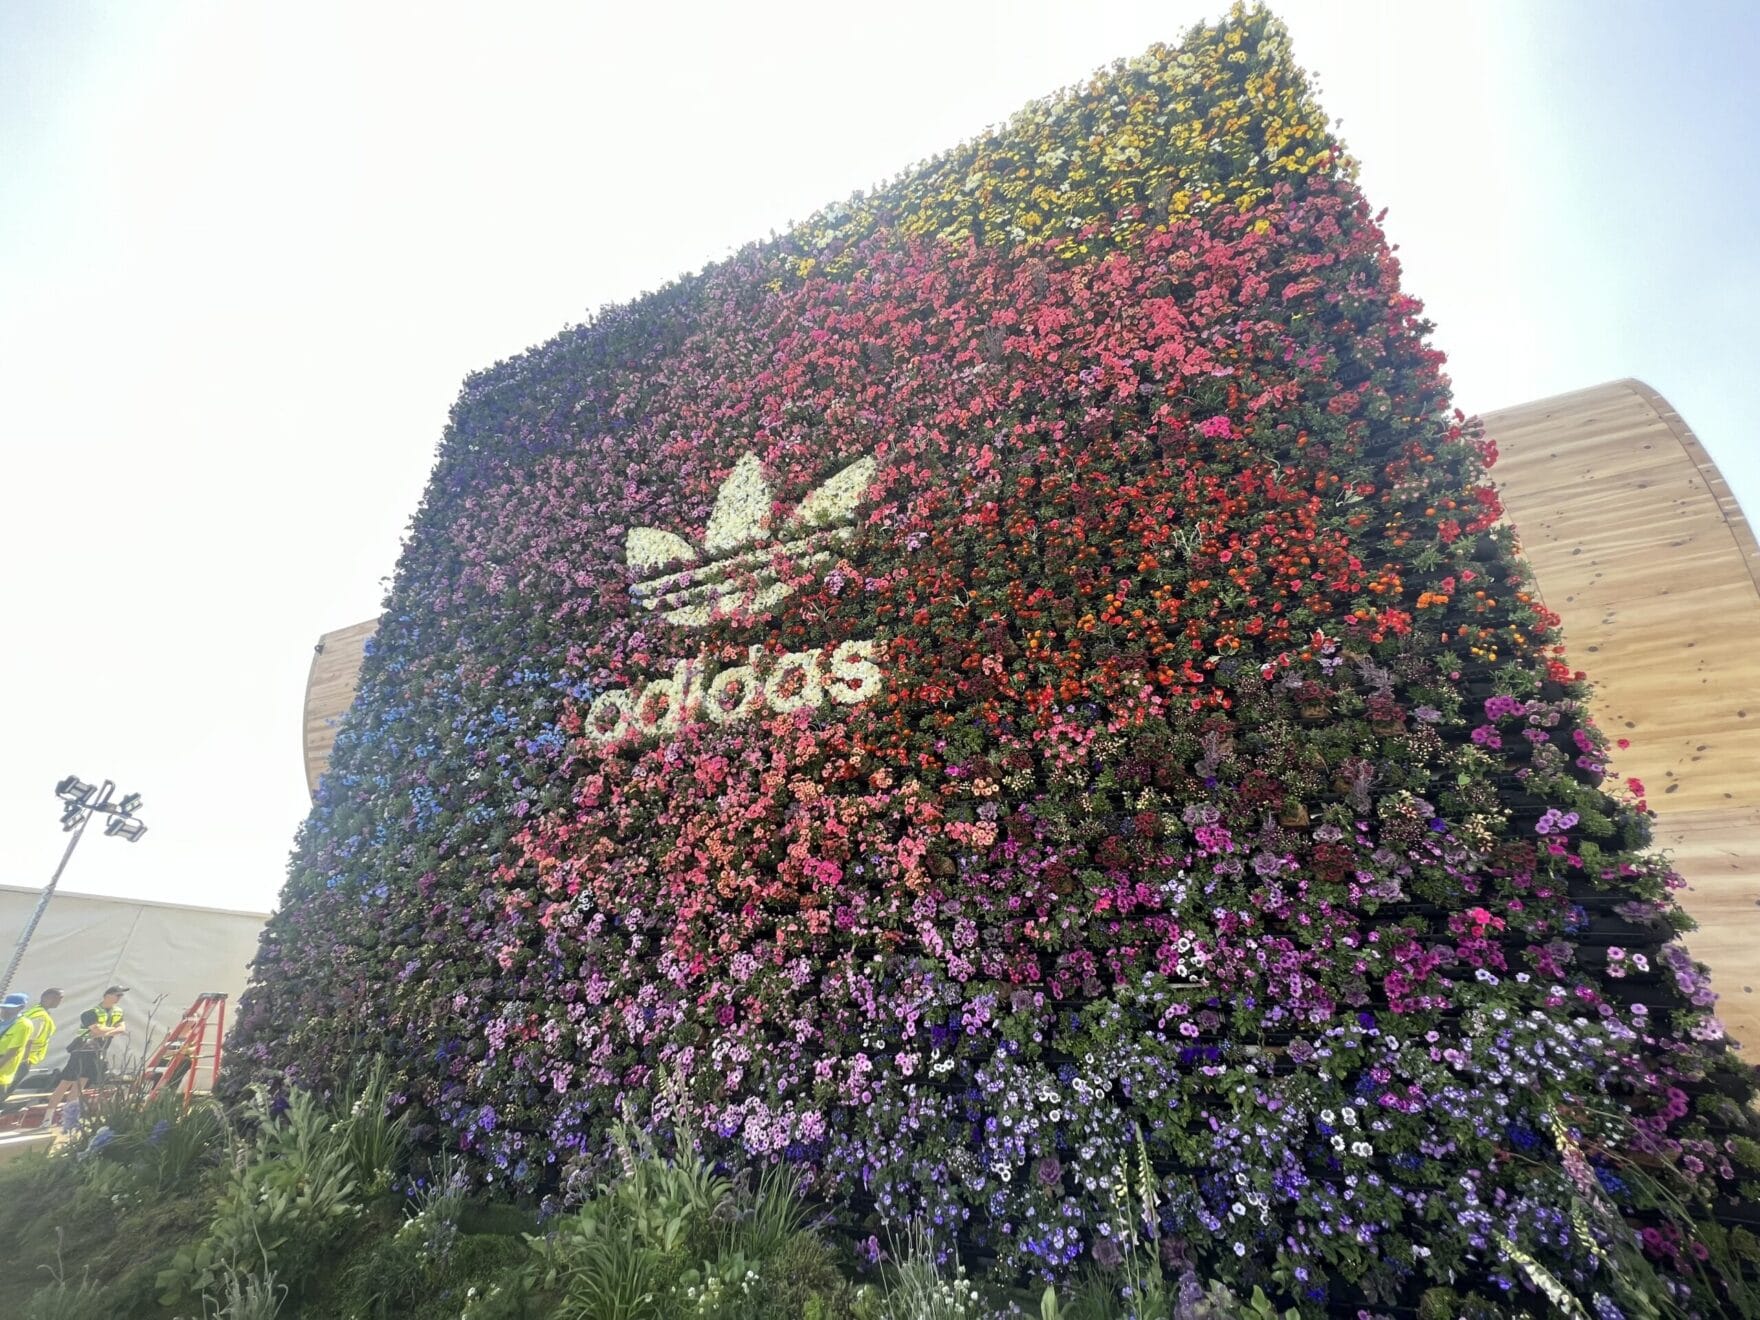 Adidas side of the finished Flower cube